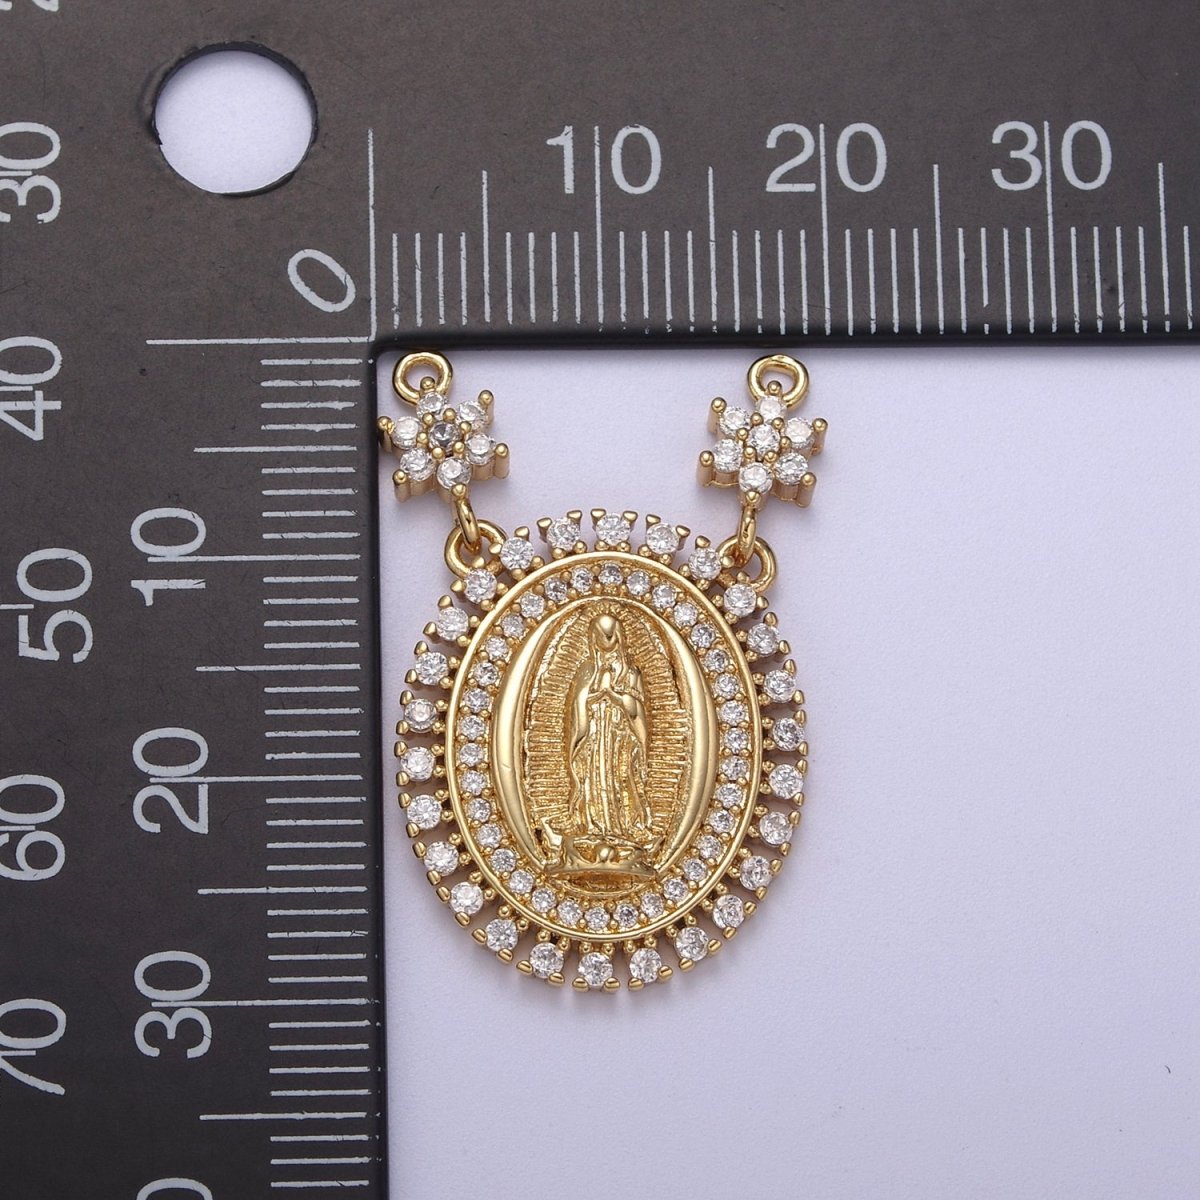 Oval Gold Lady Guadalupe Charm Connector Virgin Mary Coin Medallion Pendant for Religious Necklace F-133 - DLUXCA